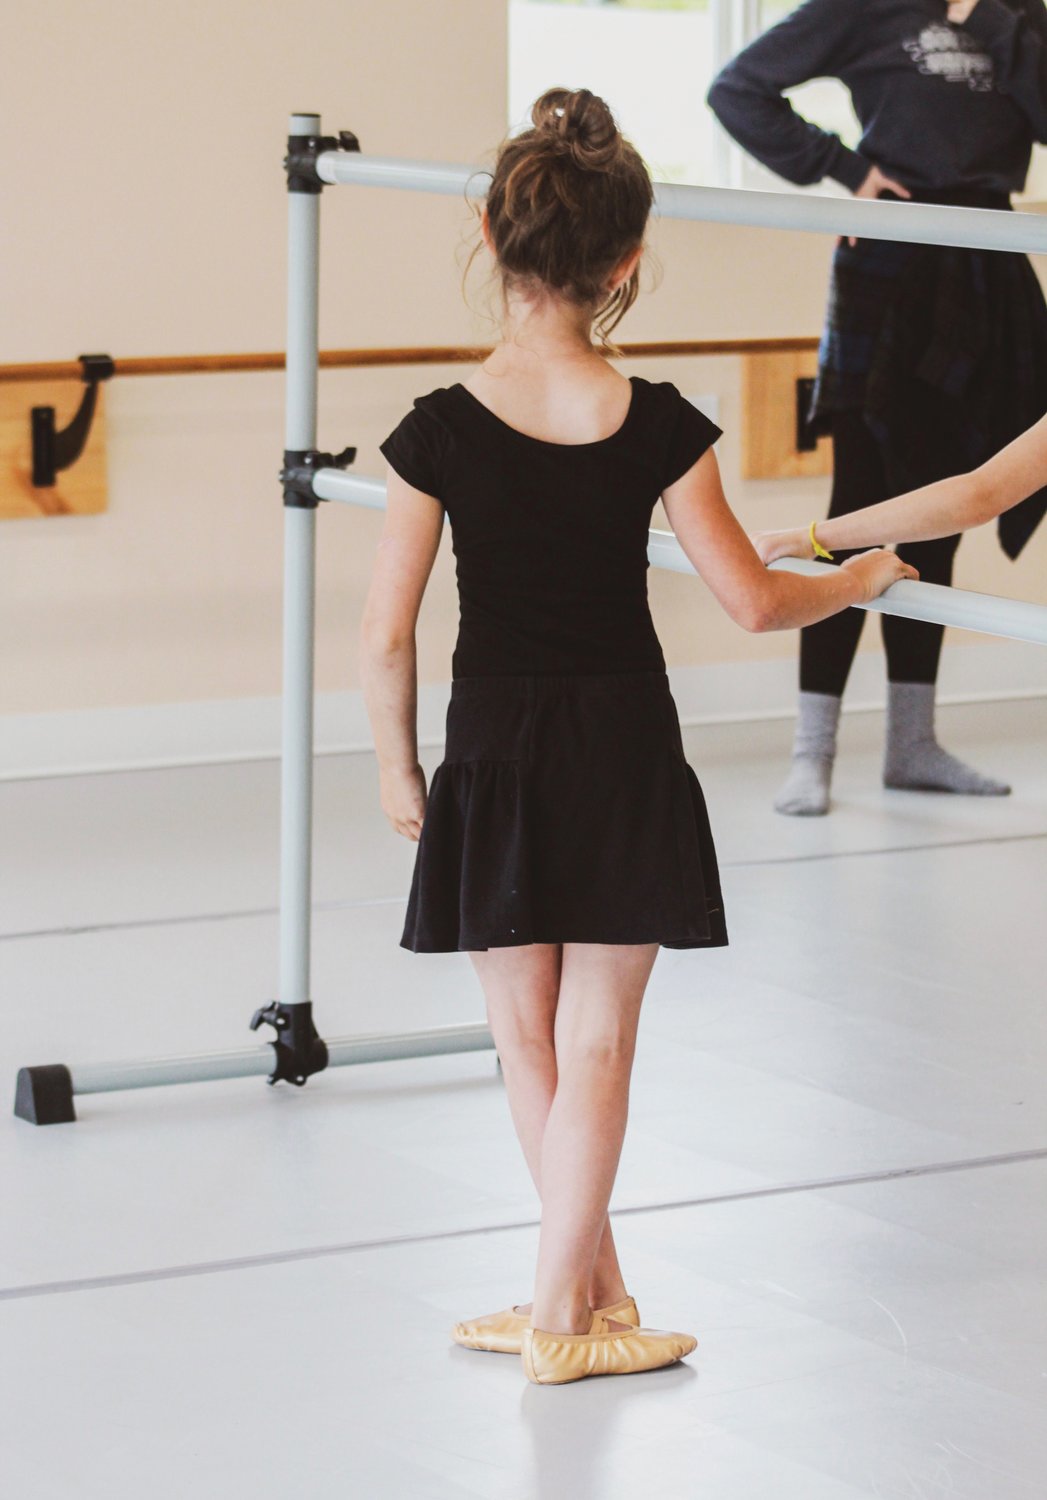 A young student prepares to dance at Port Townsend Ballet.